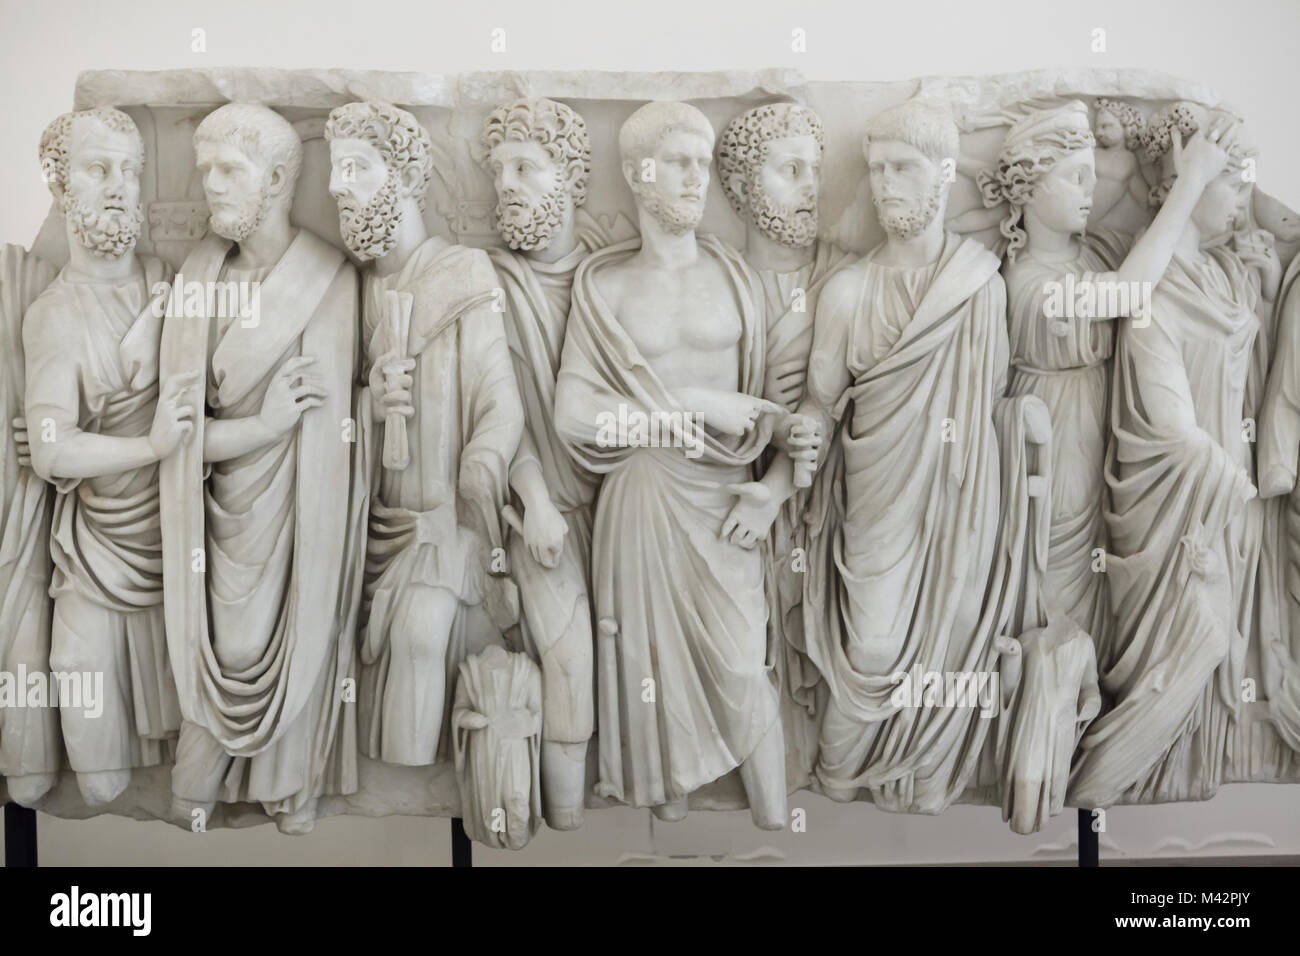 Sarcophagus with togate men and female figures, known as the Sarcophagus of the Brothers. Roman marble sarcophagus from the middle of the 3rd century AD from the Farnese Collection on display in the National Archaeological Museum in Naples, Campania, Italy. Stock Photo